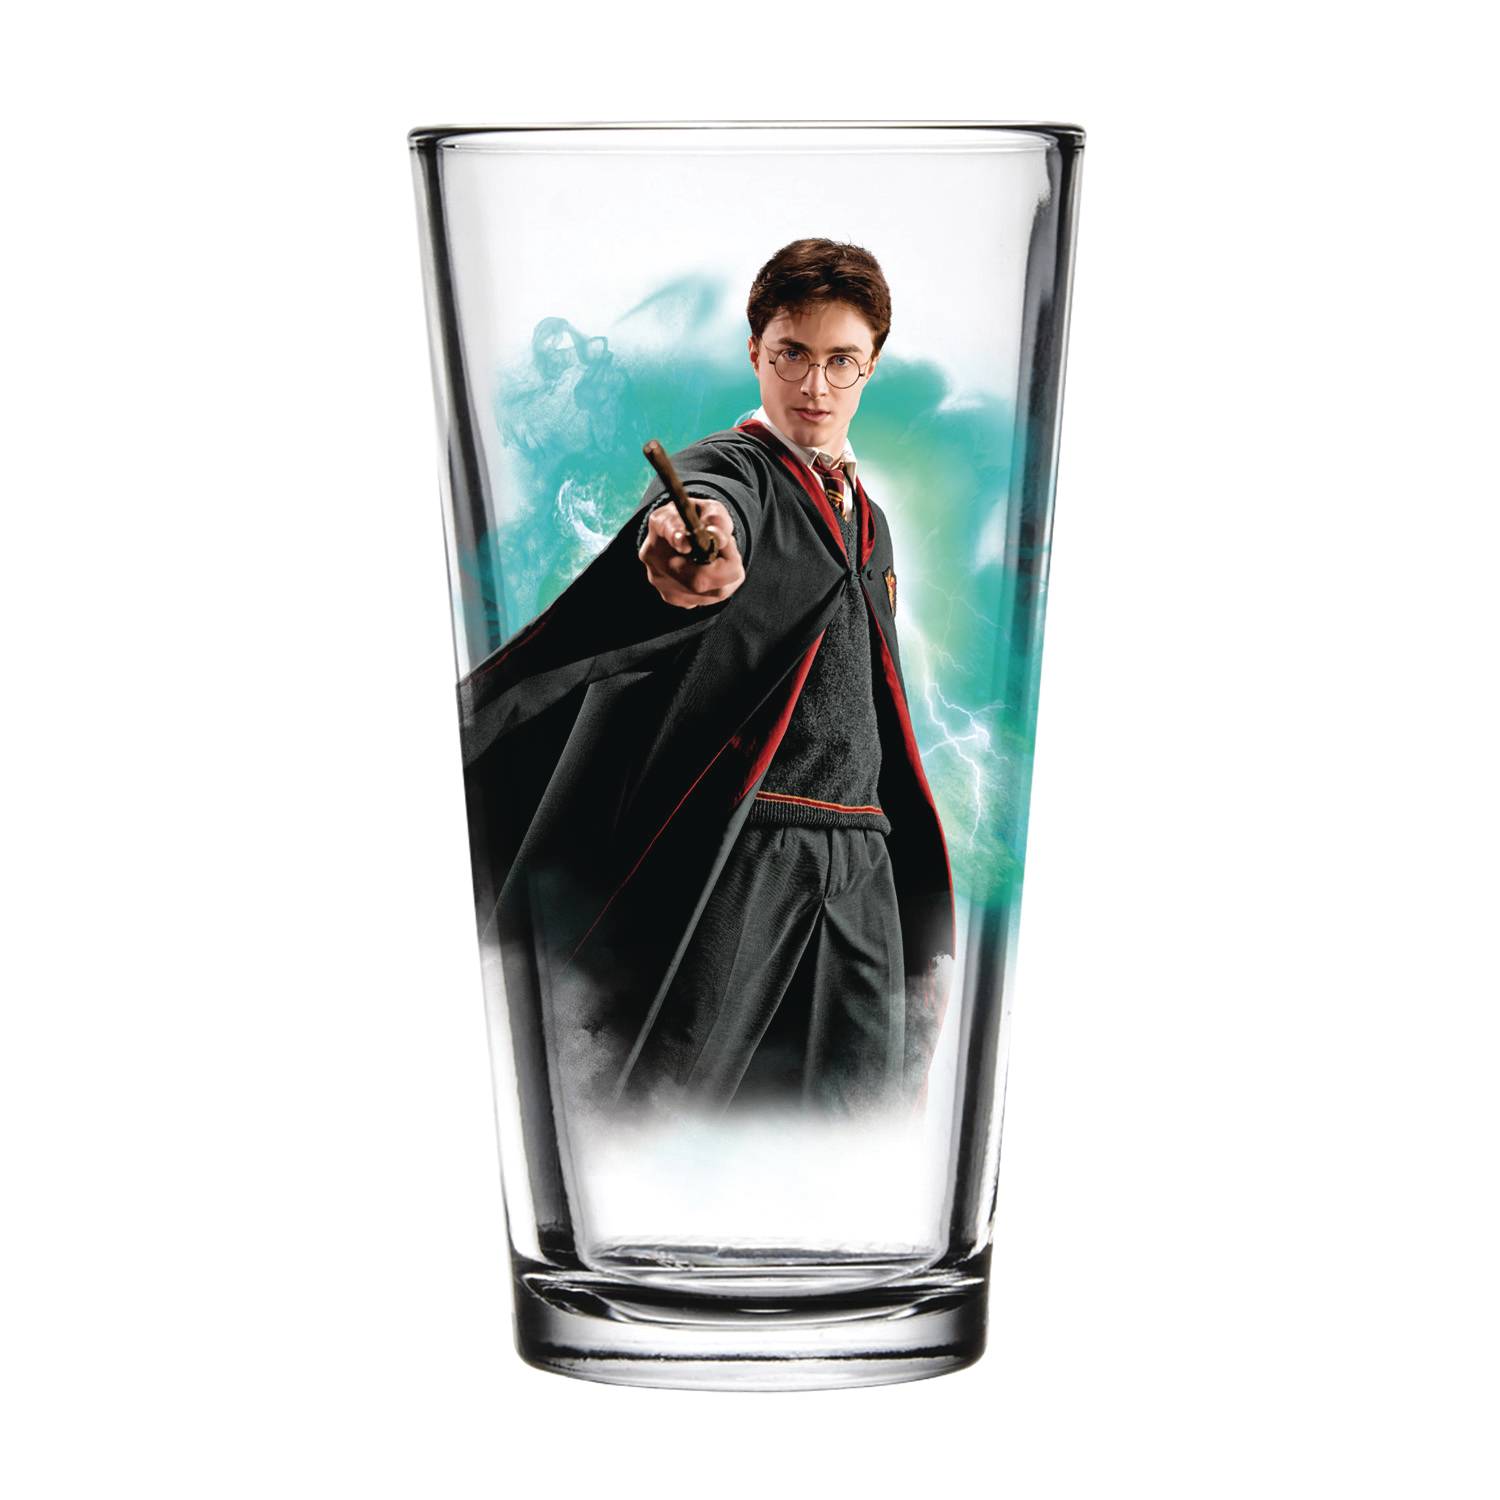 TOON TUMBLERS HARRY POTTER MOVIE PINT GLASS